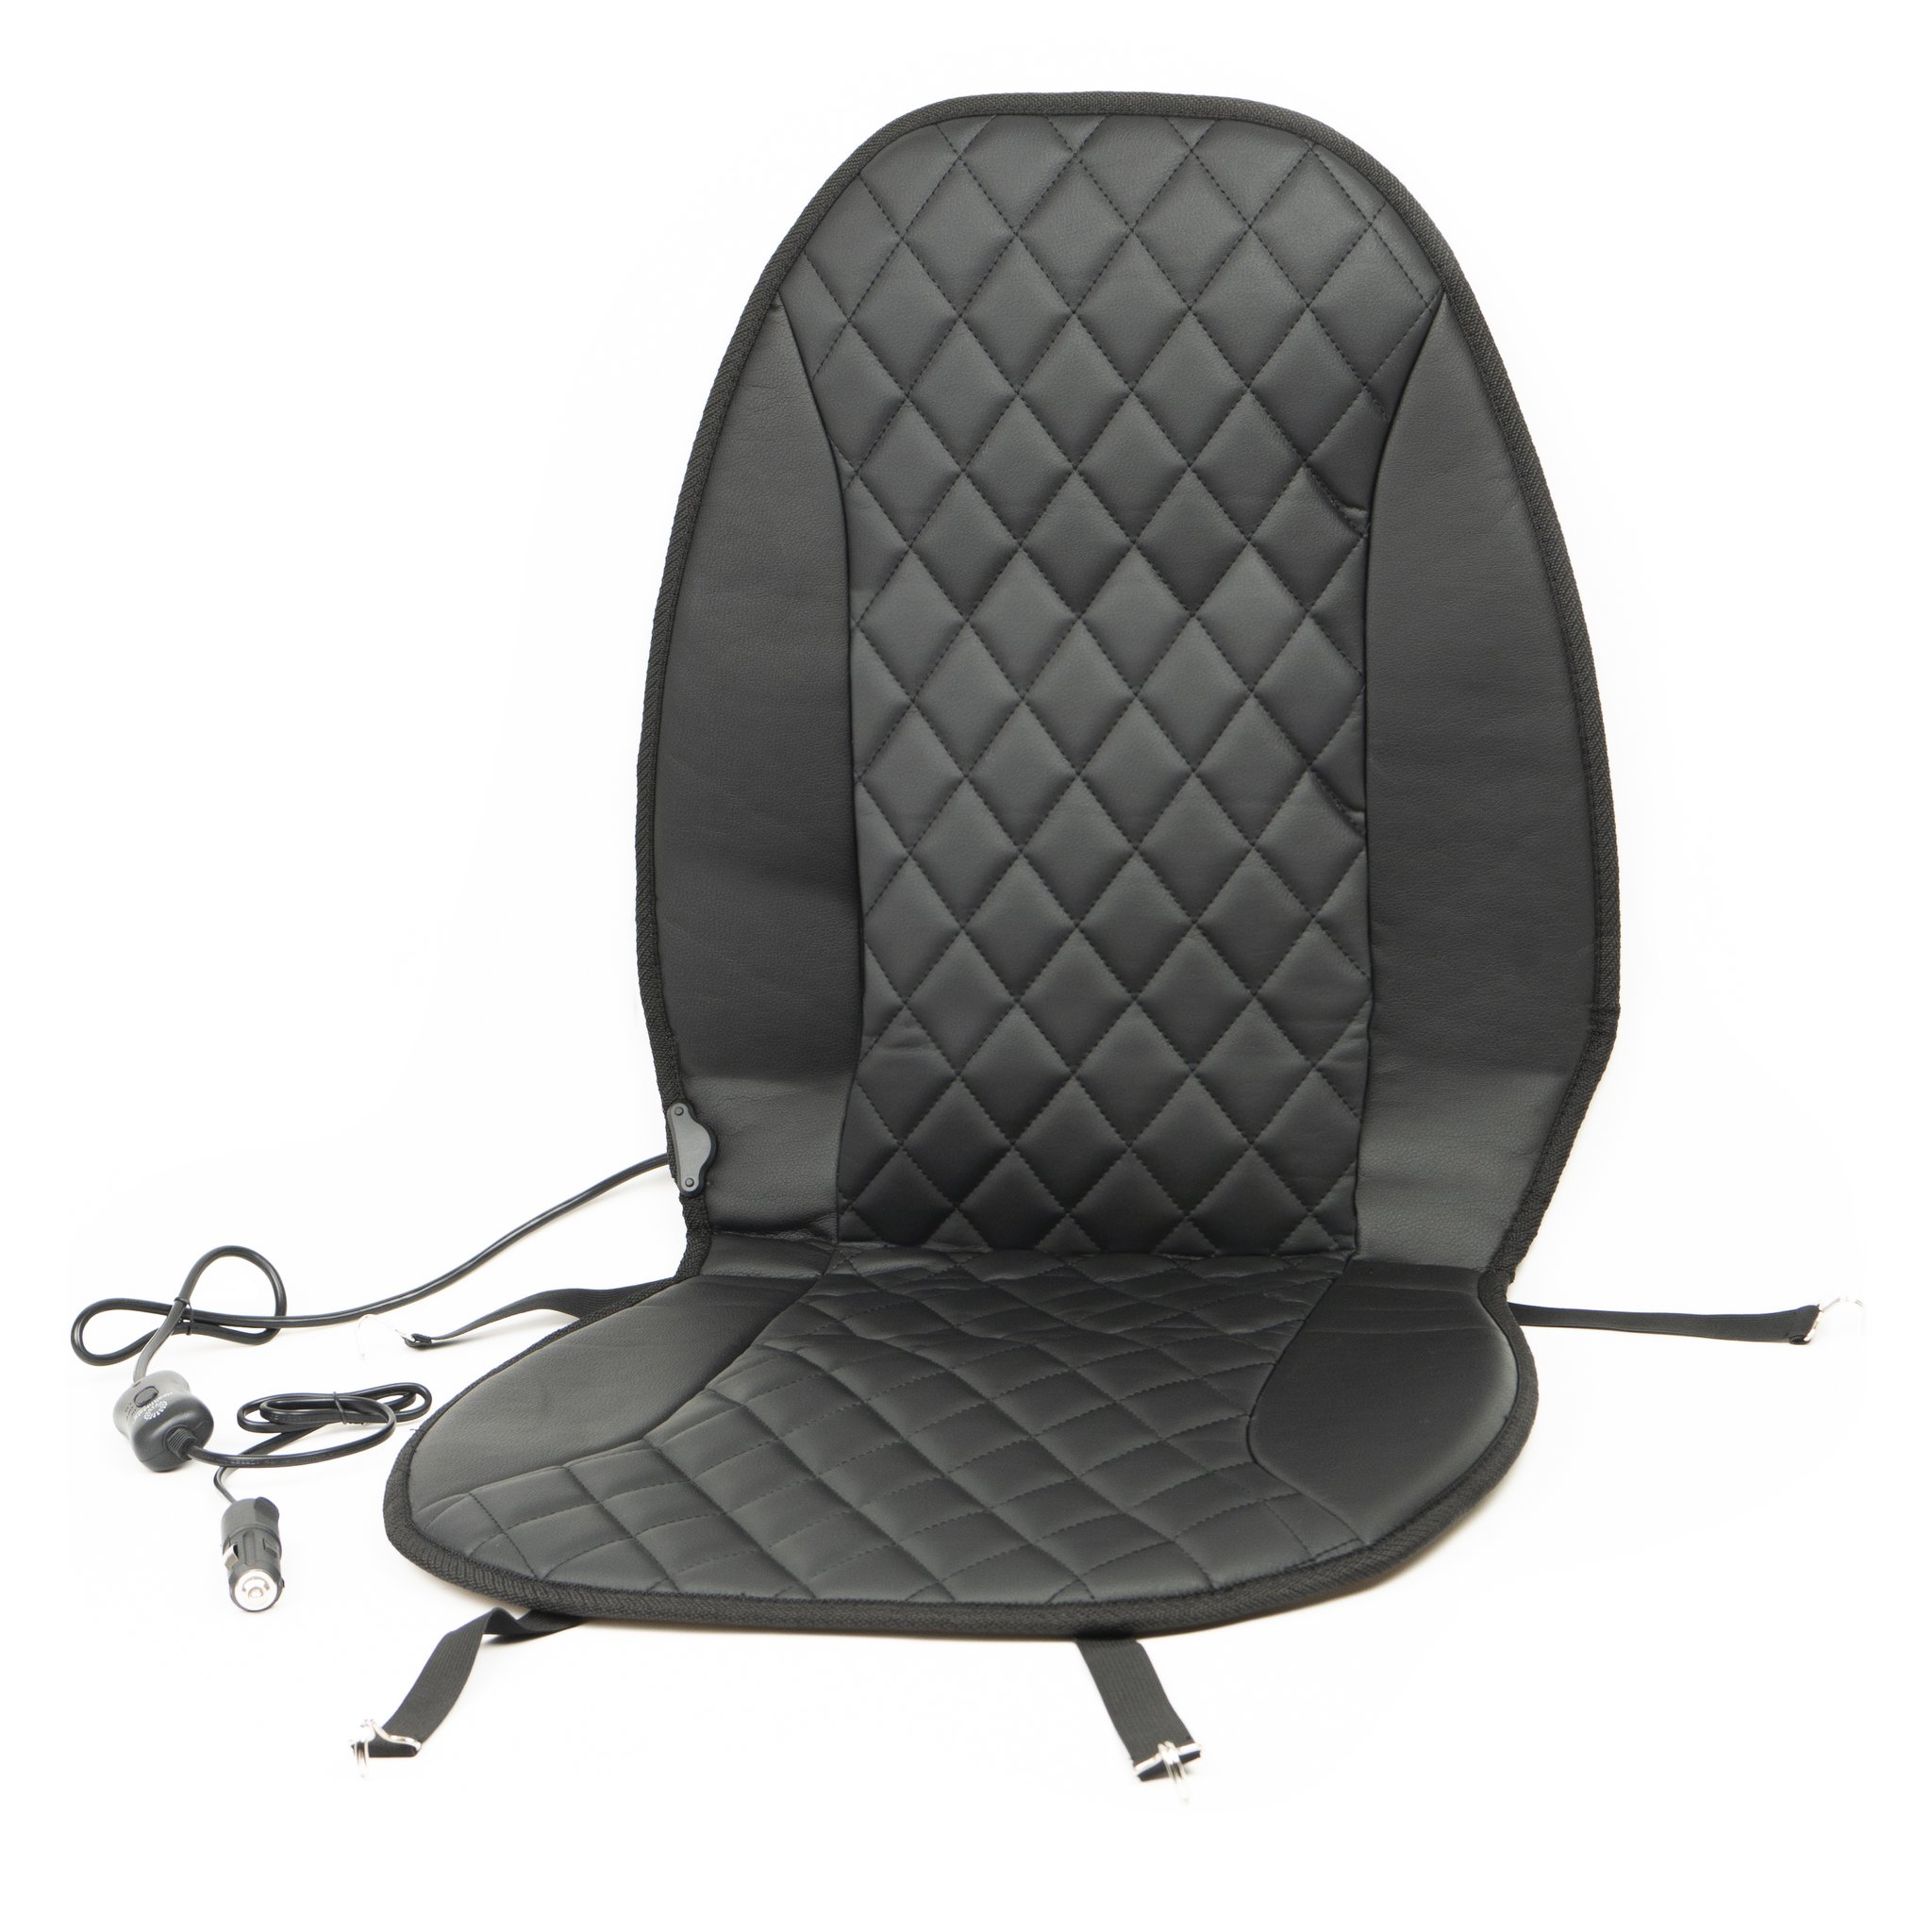 https://op2.0ps.us/original/opplanet-wagan-luxury-heated-seat-cushion-black-one-size-in9432-main